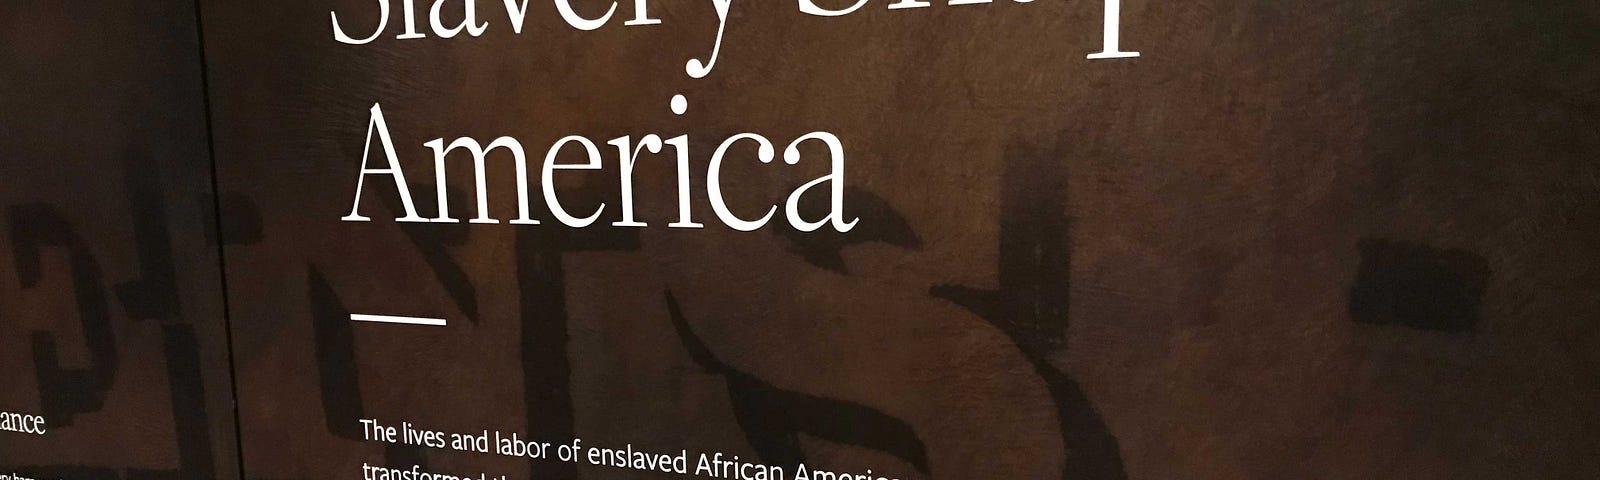 A museum sign that reads “Slavery Shapes America” with a written explanation of how slavery transformed America into a world superpower.